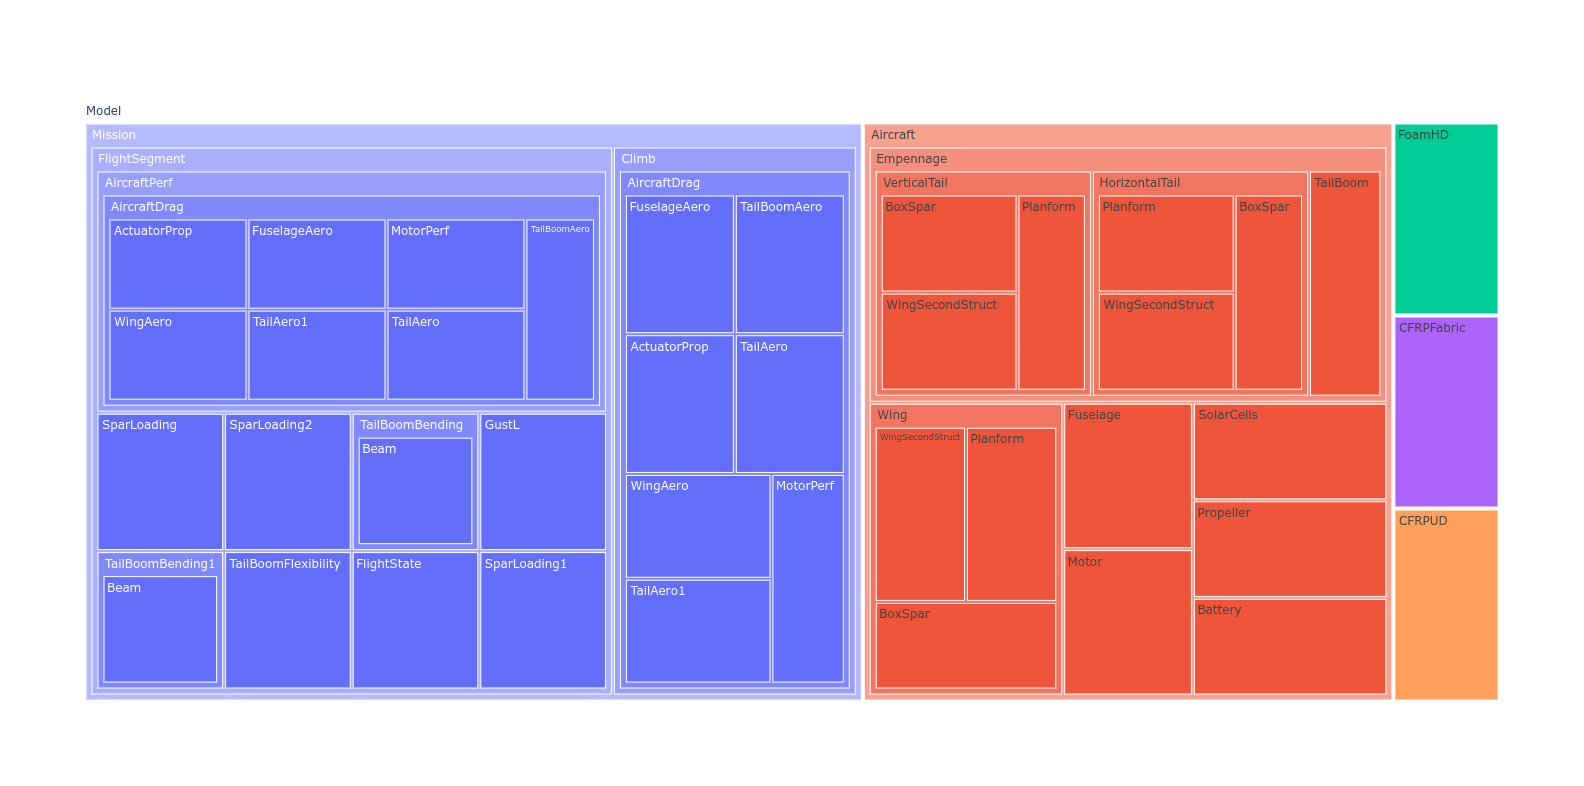 _images/treemap.png